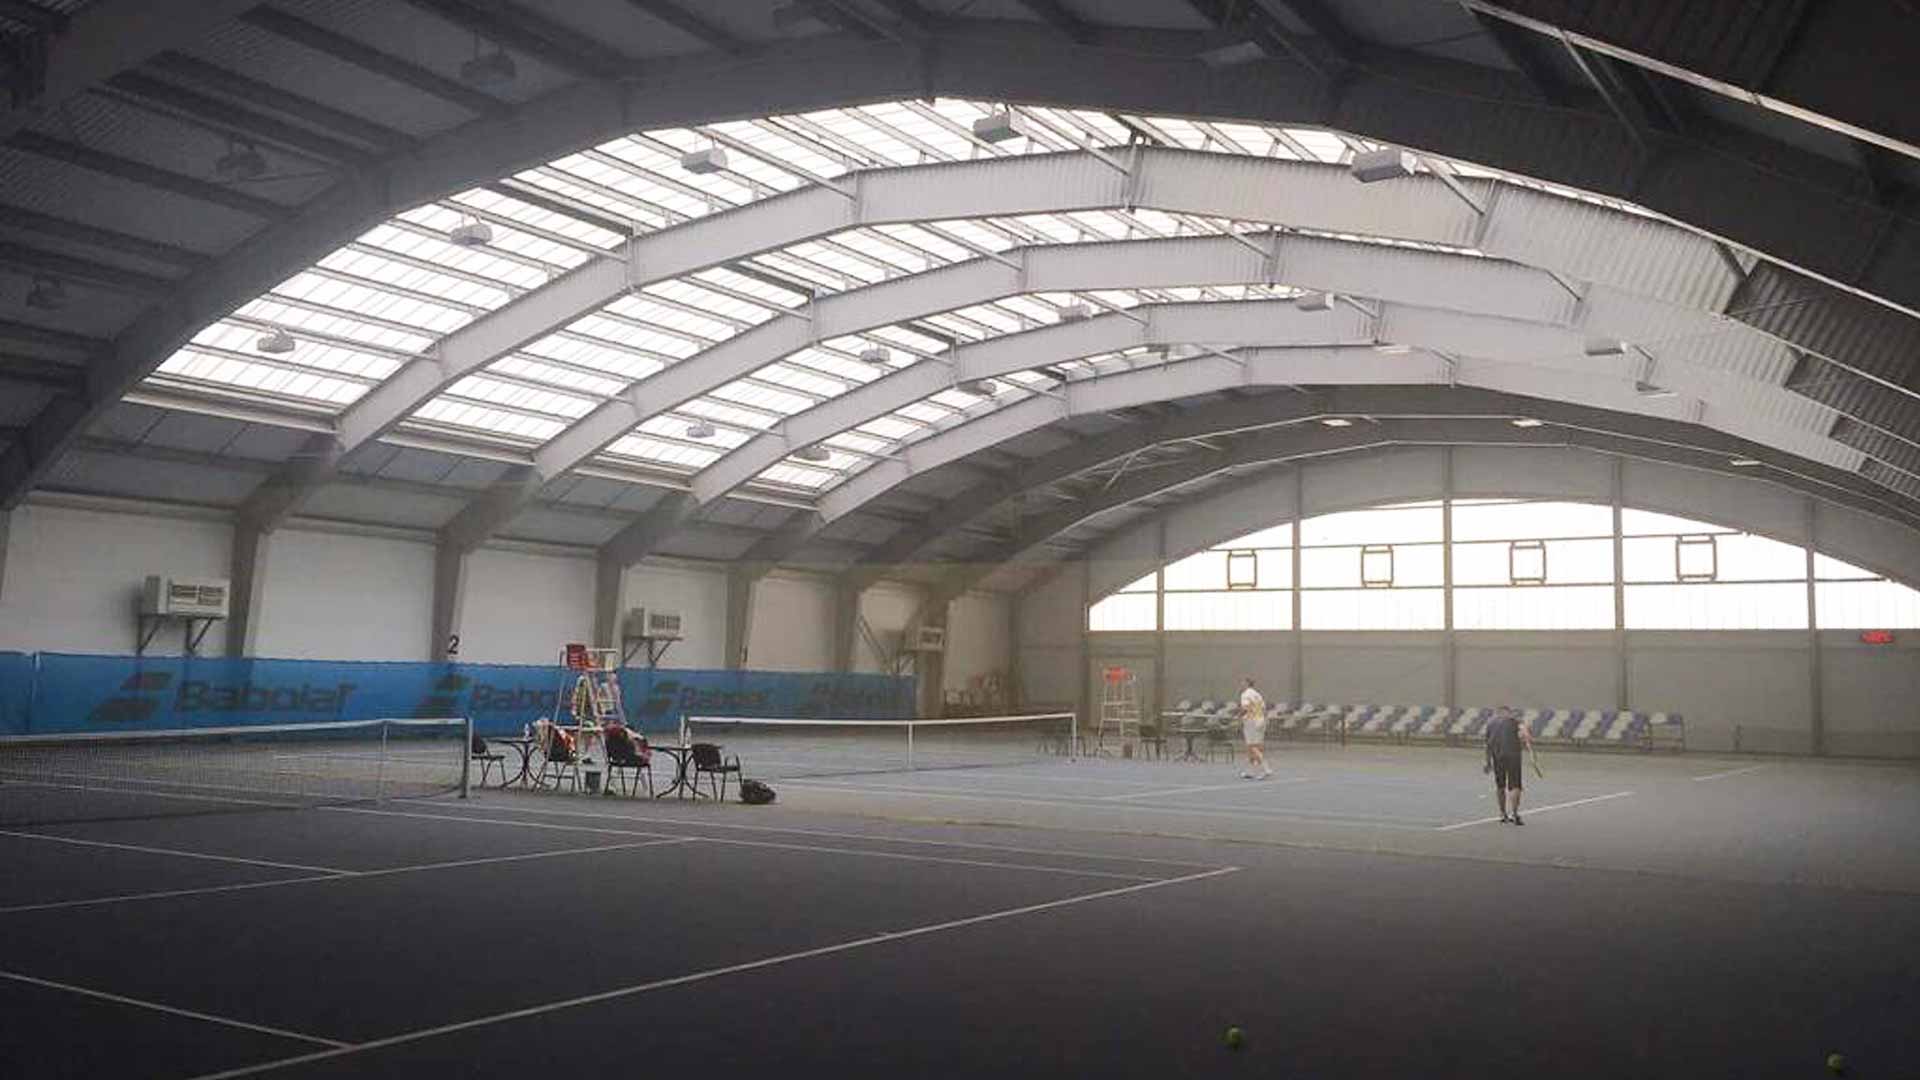 The courts at the Premier Tennis Club In Ukraine